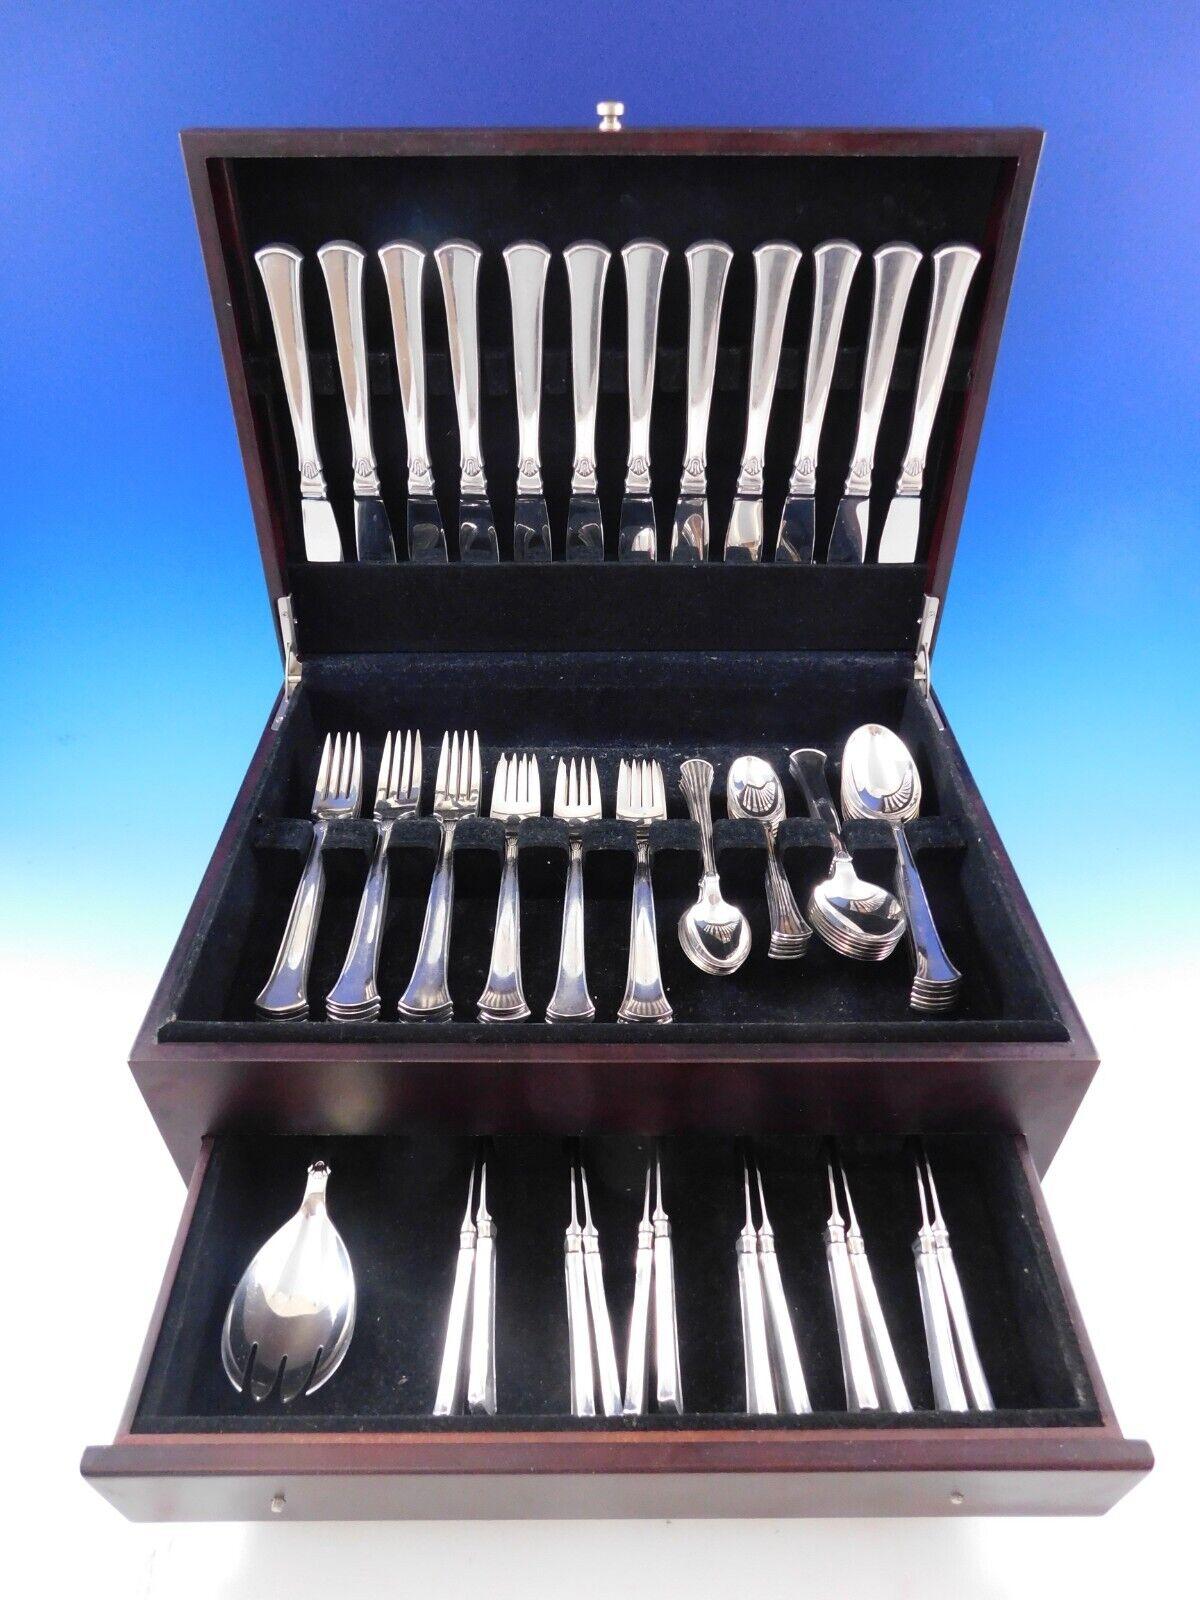 Scarce Koldring Aka Arvesolv #5 By Hans Hansen Danish sterling silver flatware set - 73 pieces. This set includes:


12 knives, long handle, 8 7/8